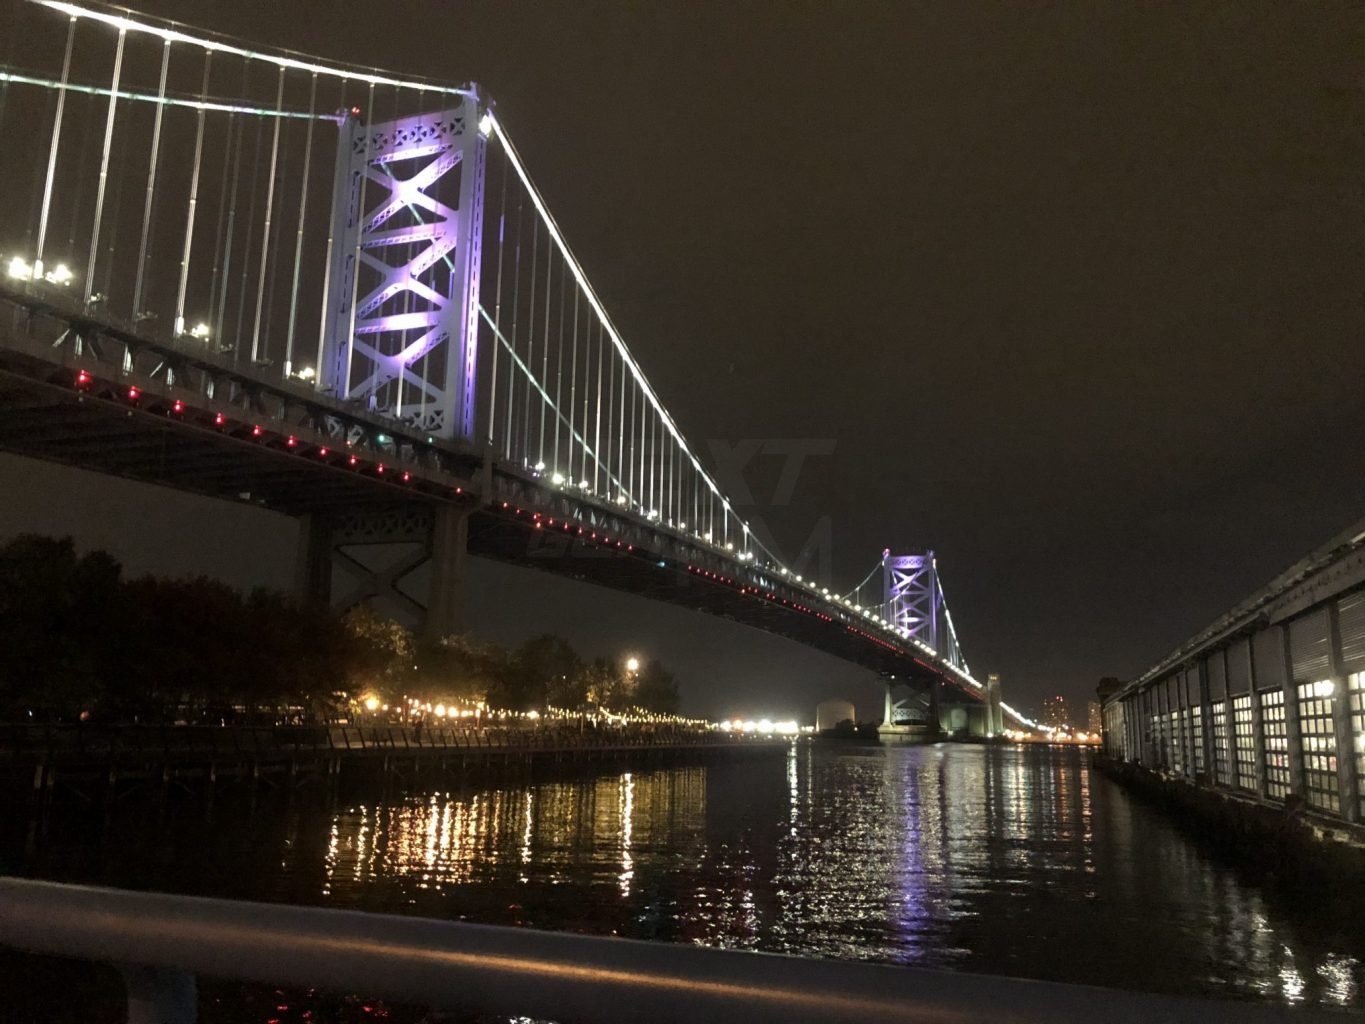 The Delaware River reflects the ghostly lights of the Ben Franklin Bridge.